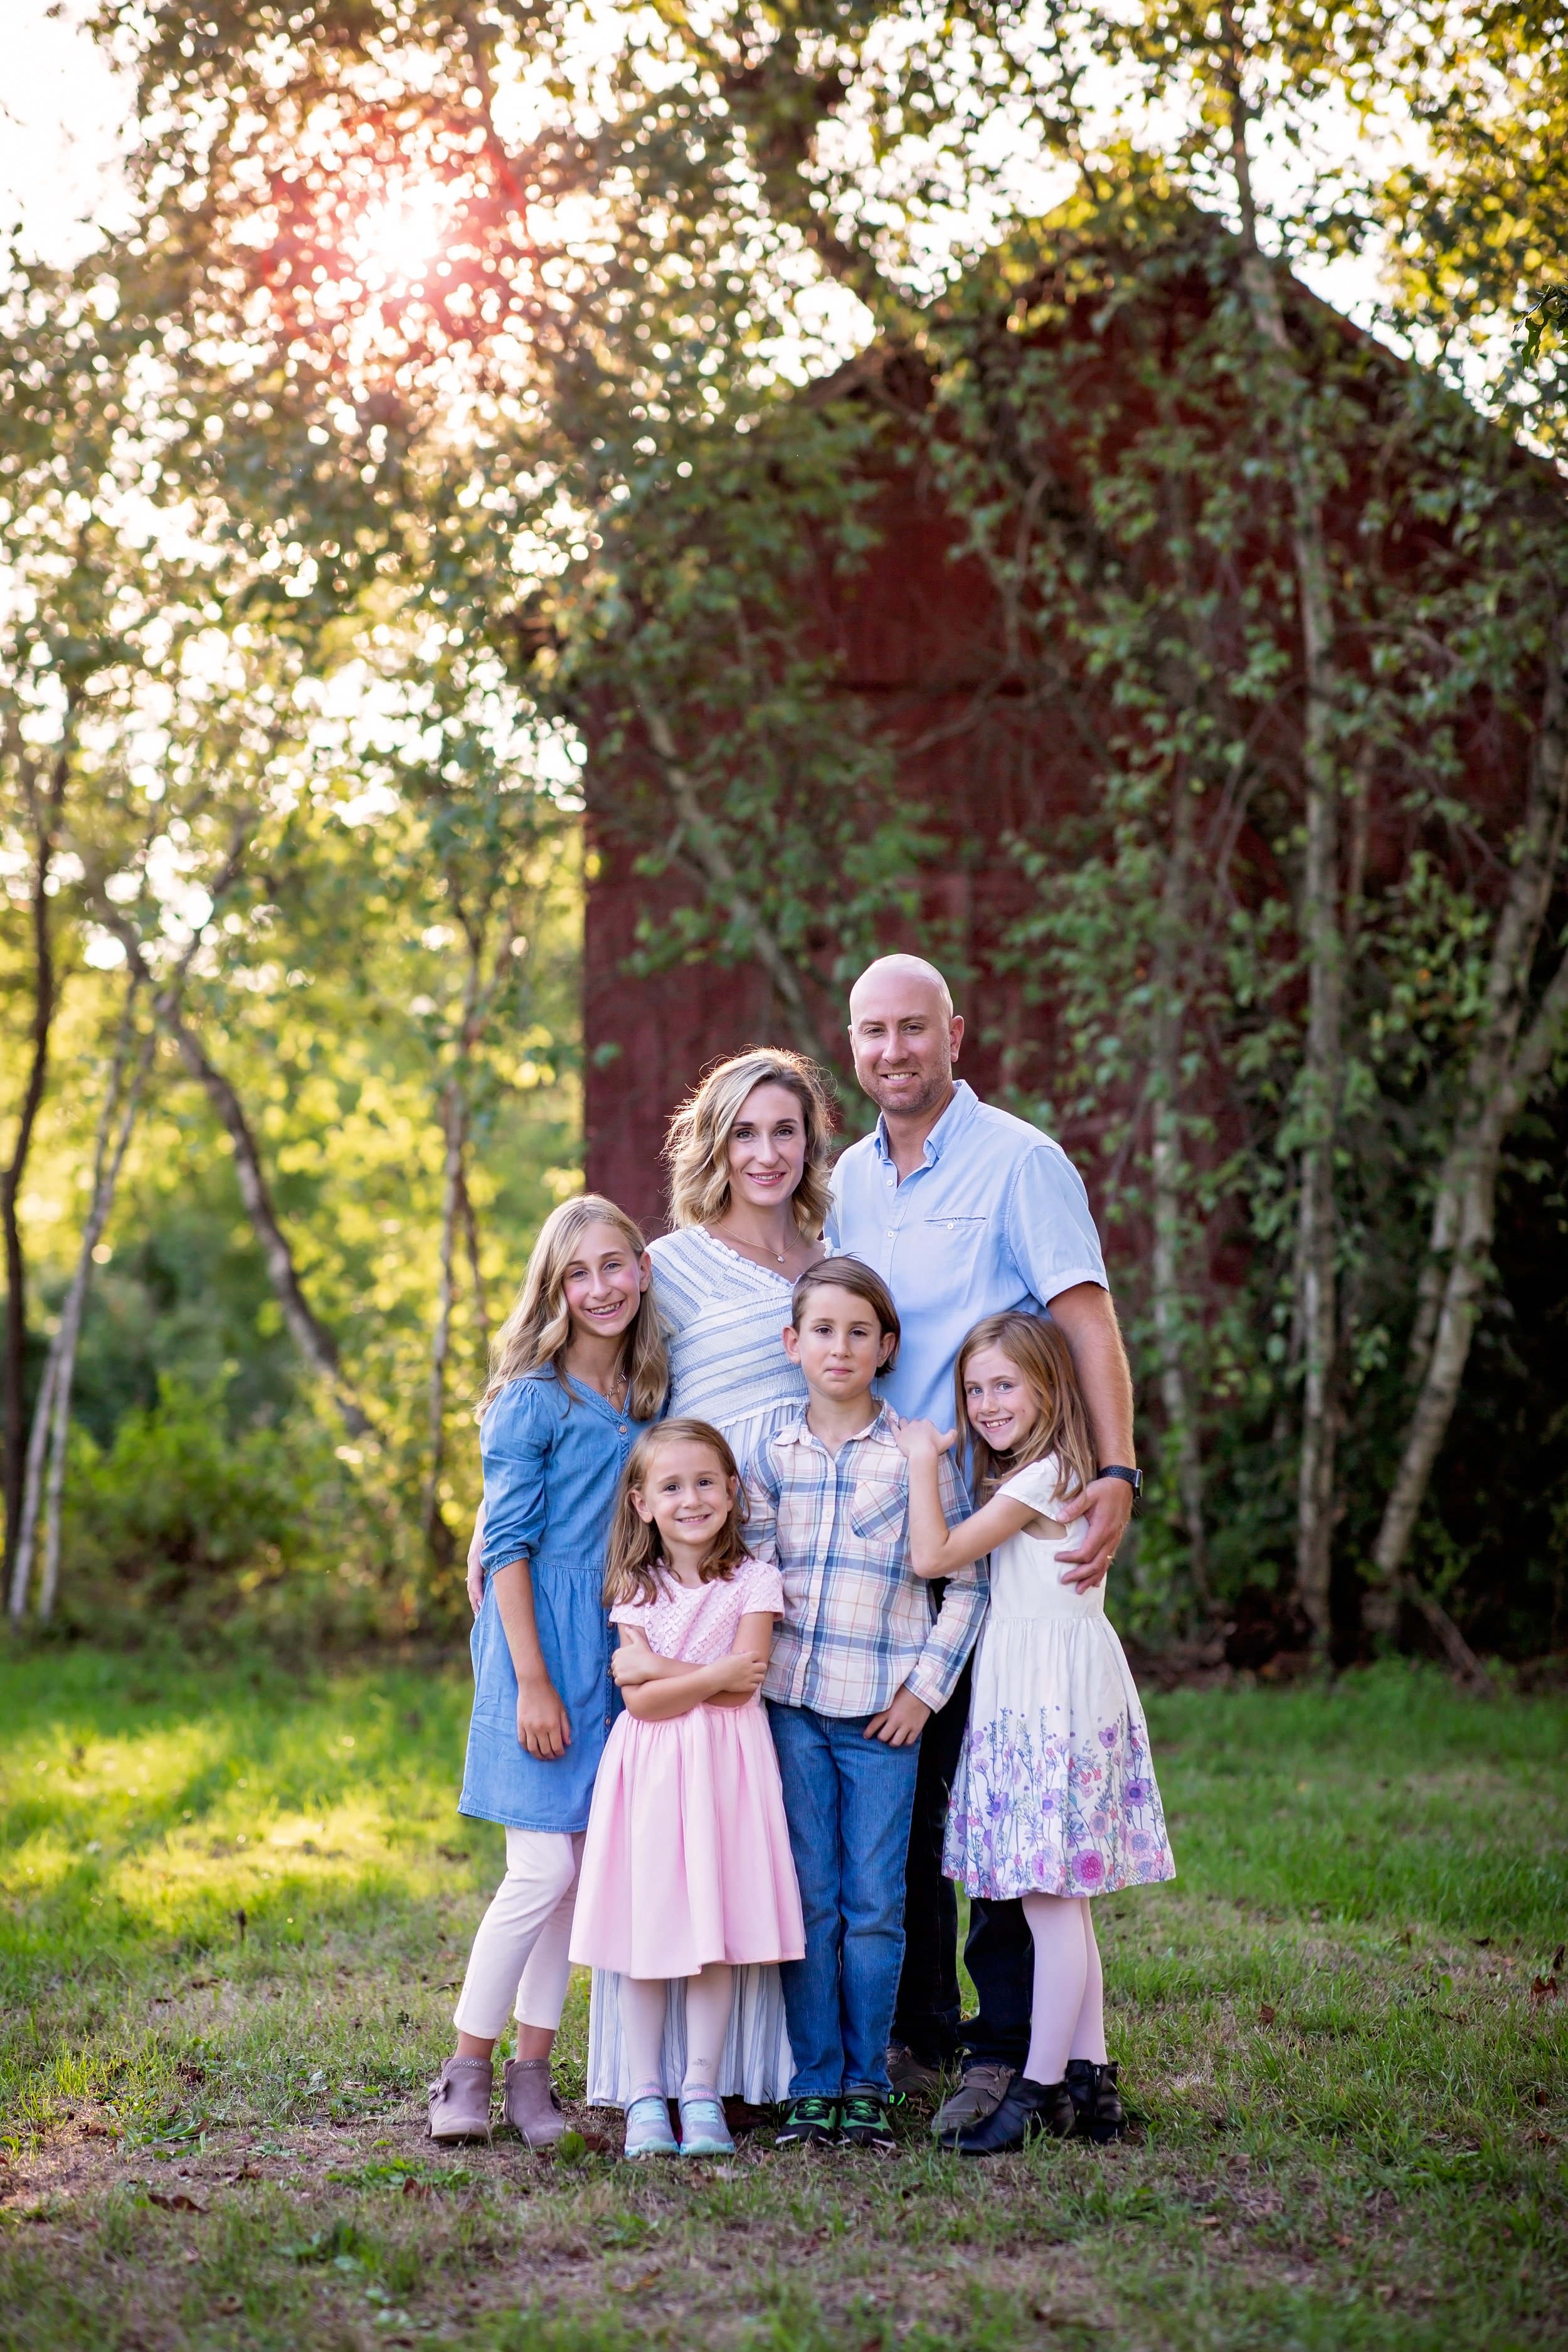  Family poses in front of red barn and trees 